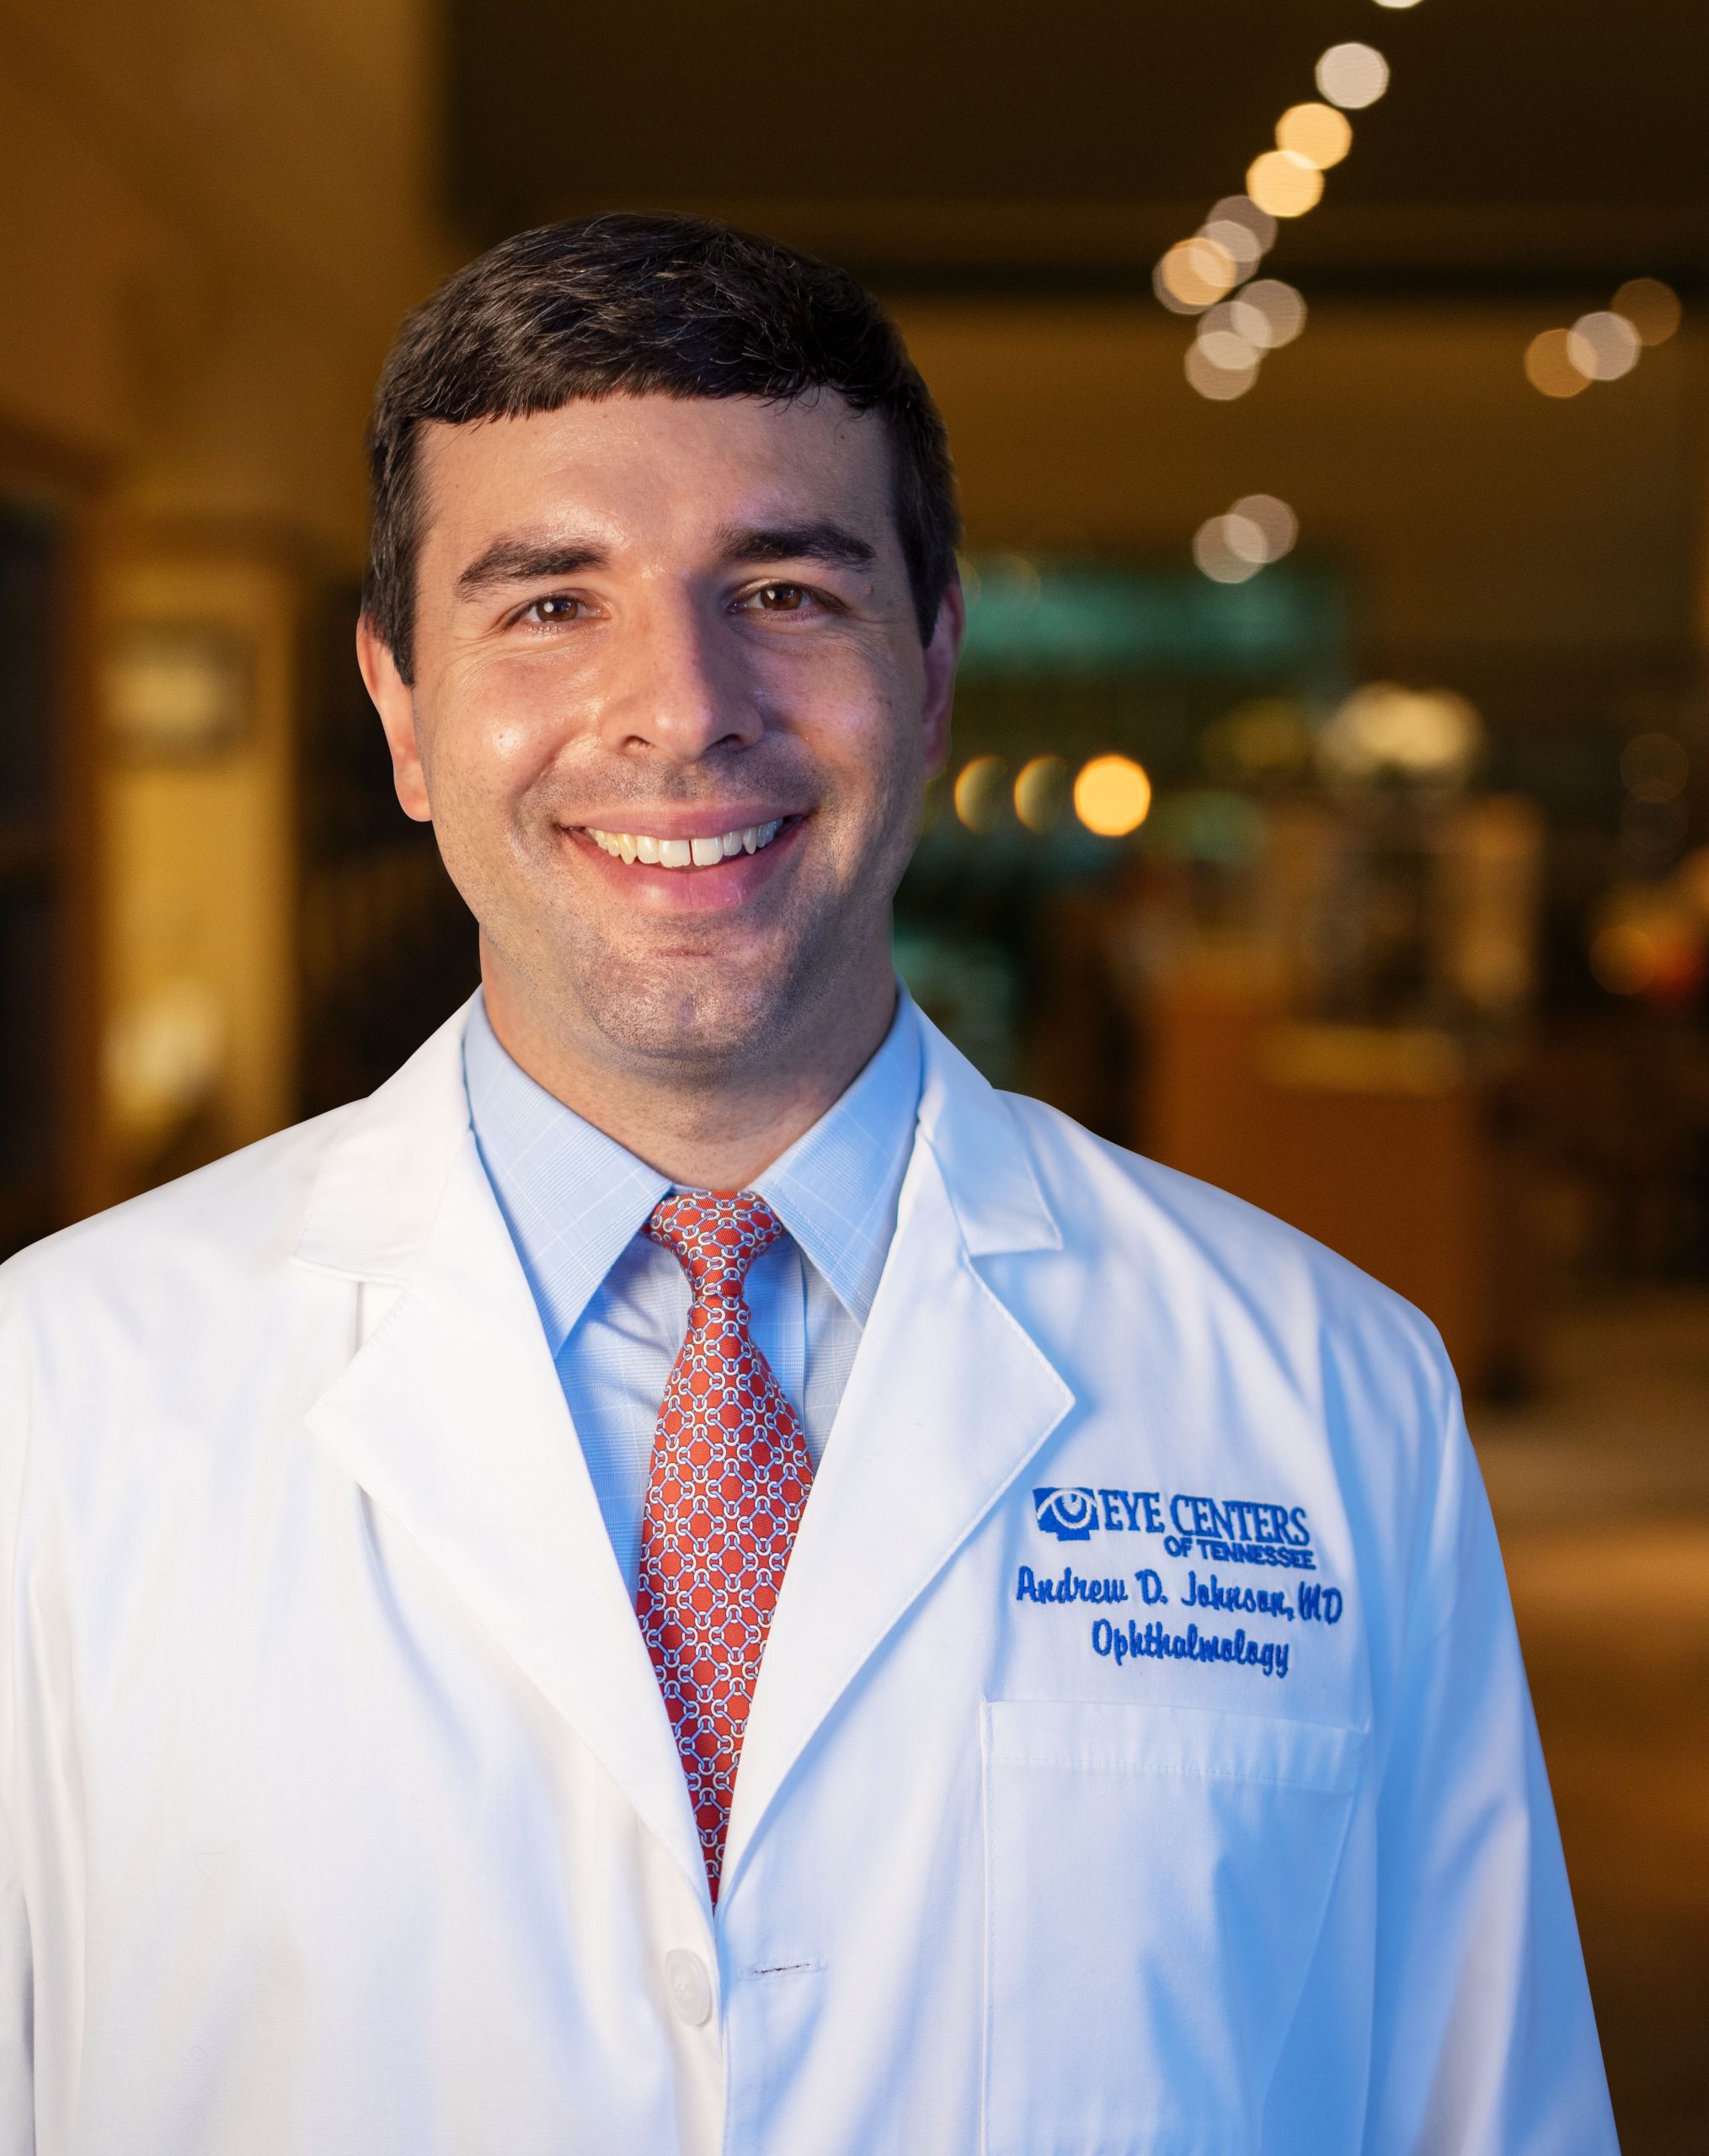 Dr. Andrew Johnson with Eye Centers of Tennessee